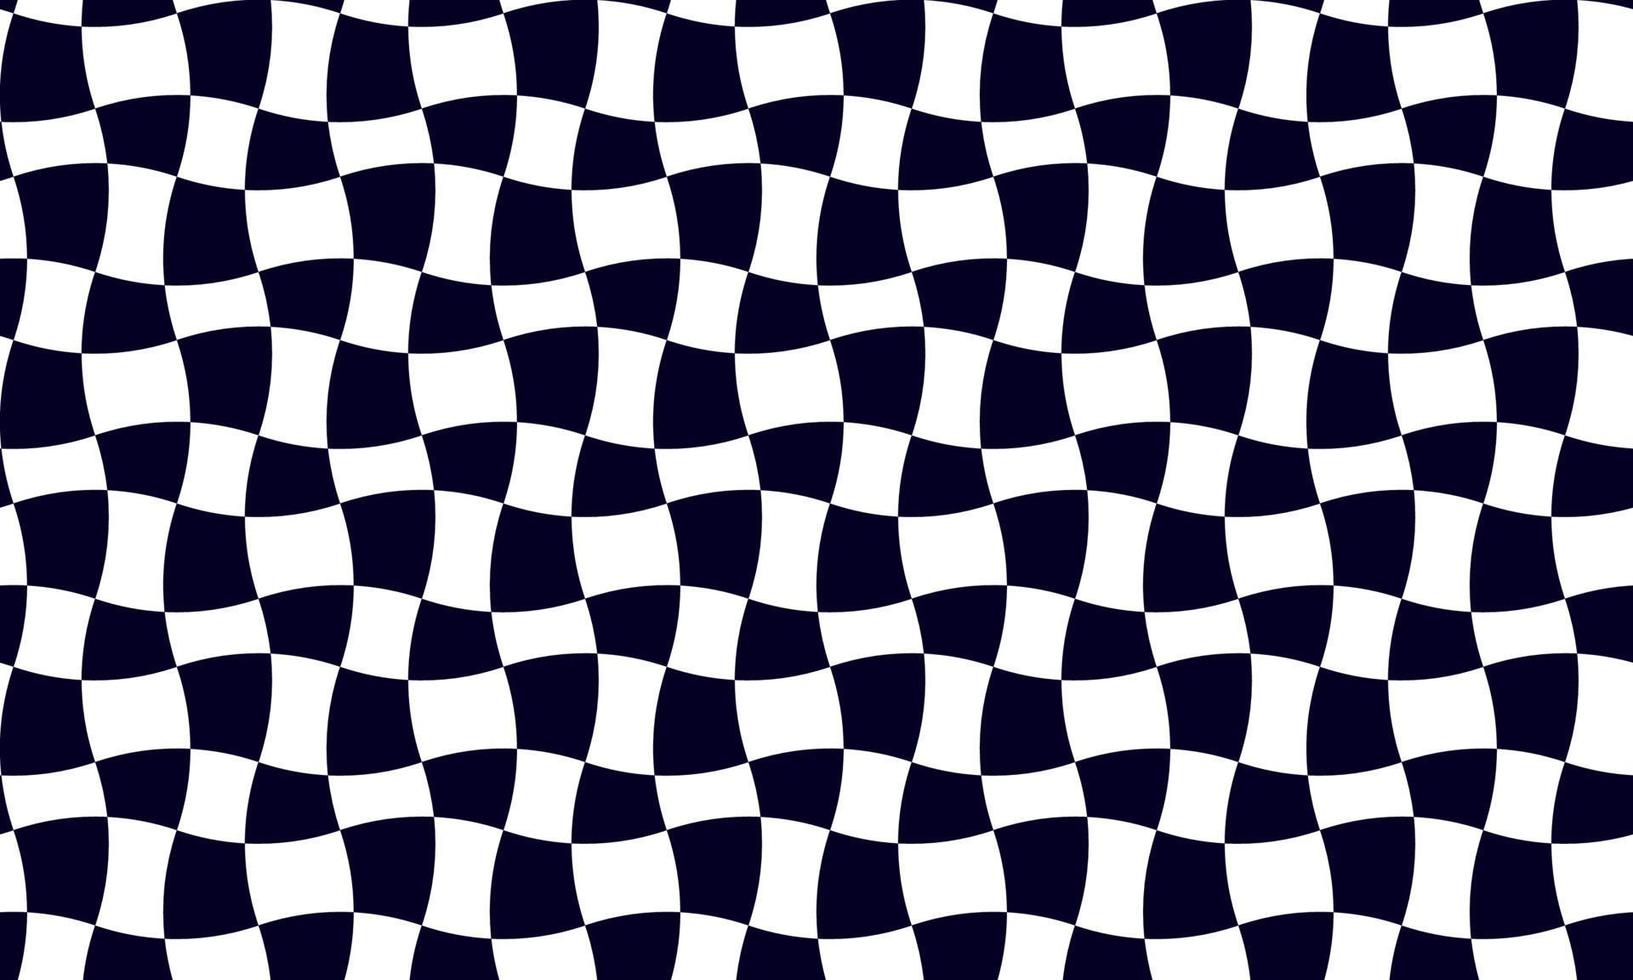 Black and white pattern of a curved chessboard in flat style for printing and decoration. Vector illustration.